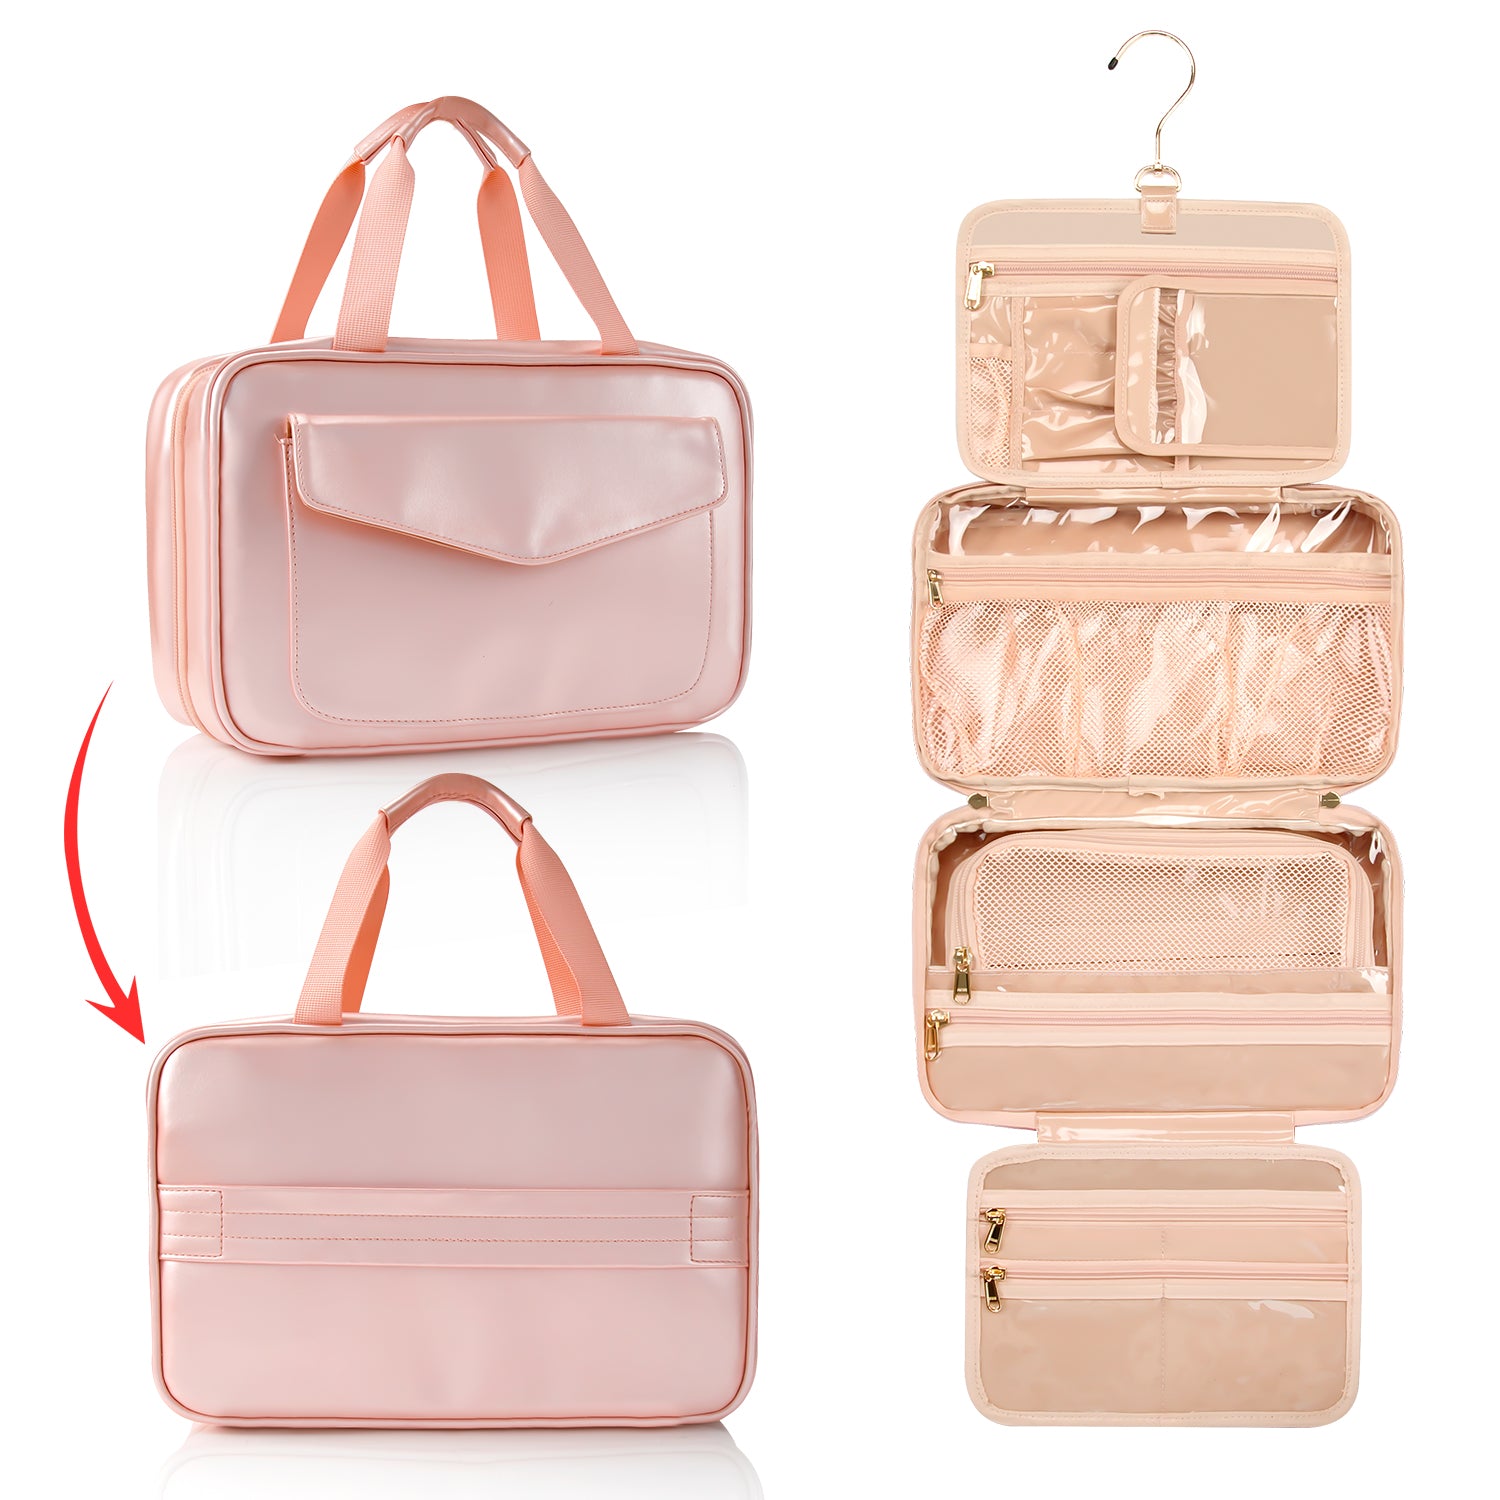 Bella, Relavel  Polyester Zipper Cosmetic Bag Waterproof Travel Makeup Organizer with Brush for Women Pink Toiletry Make up bag